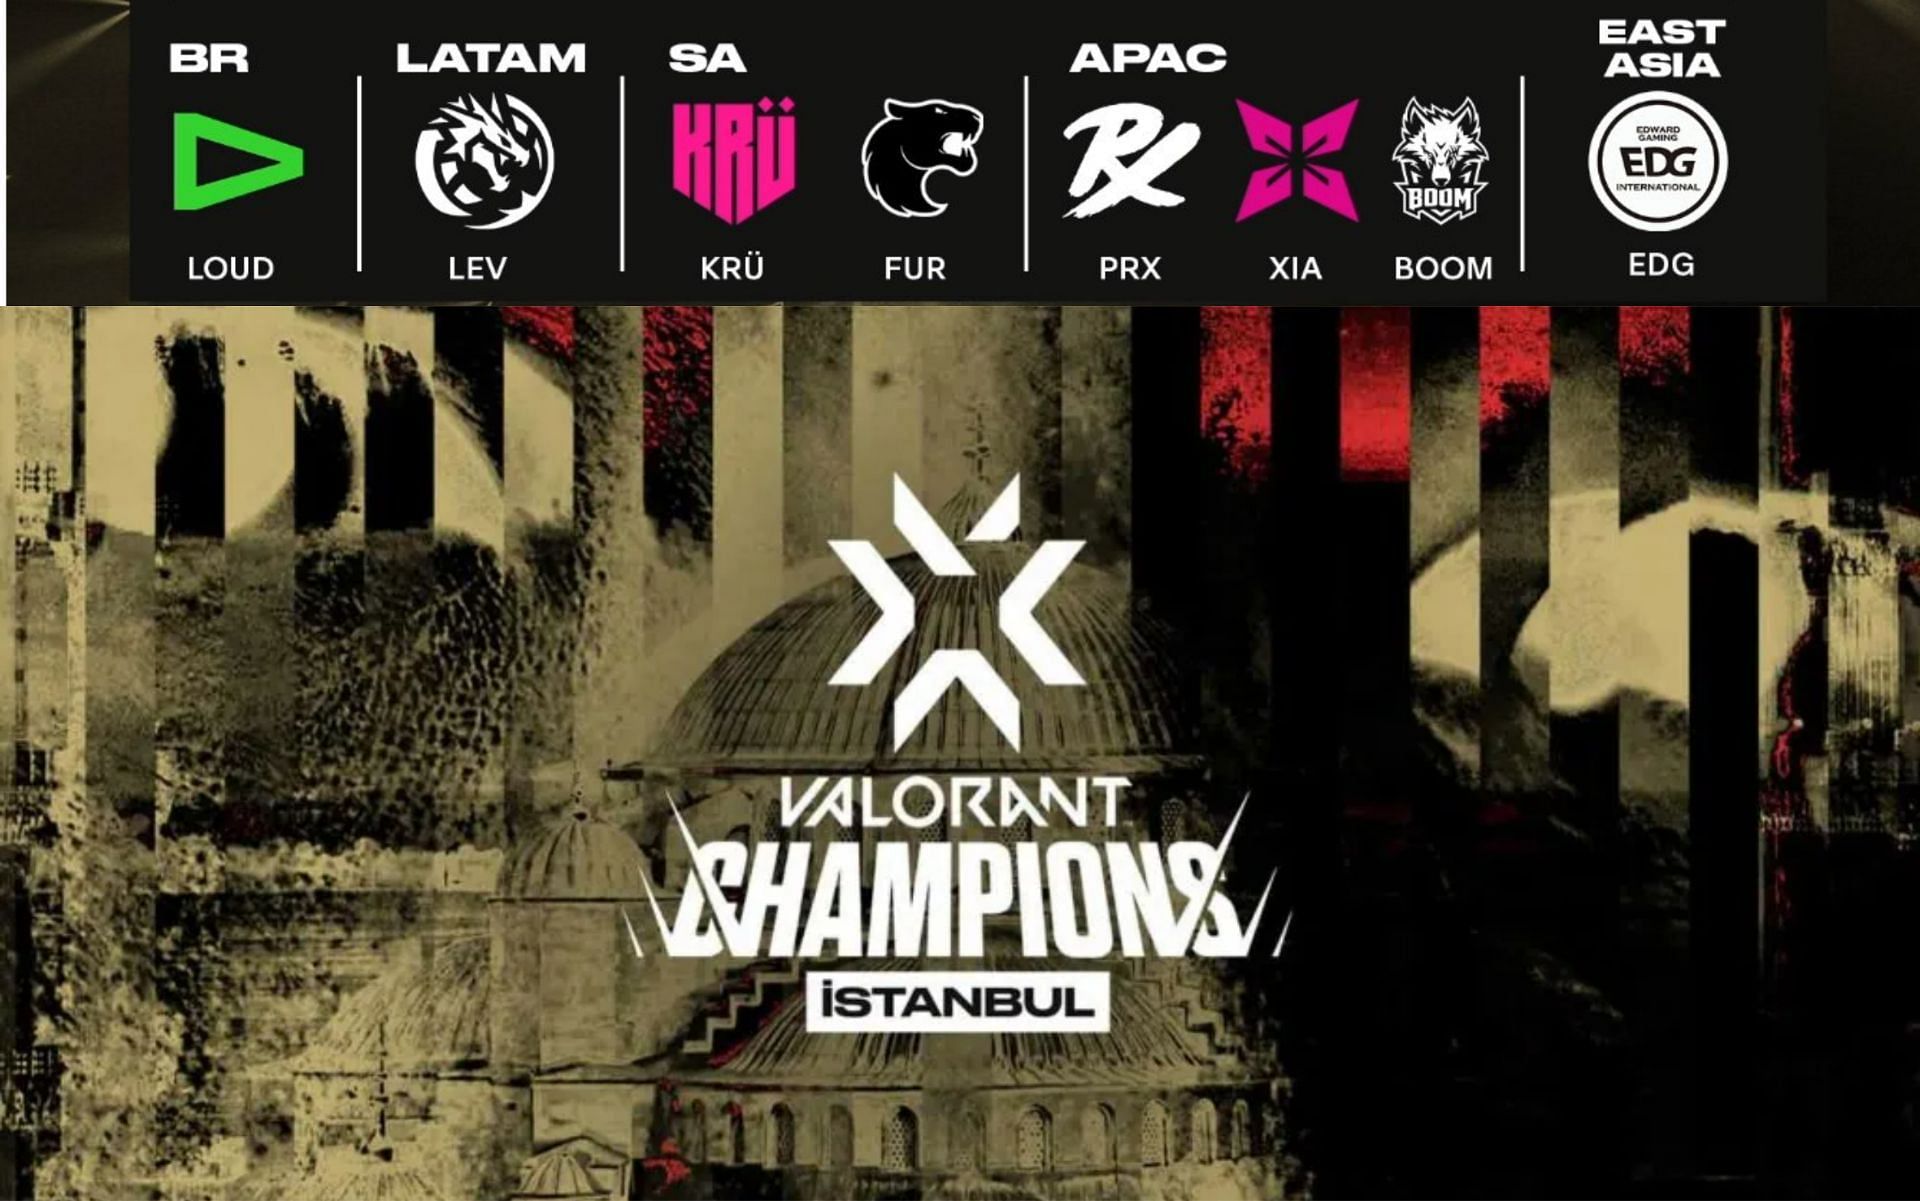 All teams that qualified for Valorant Champions 2022